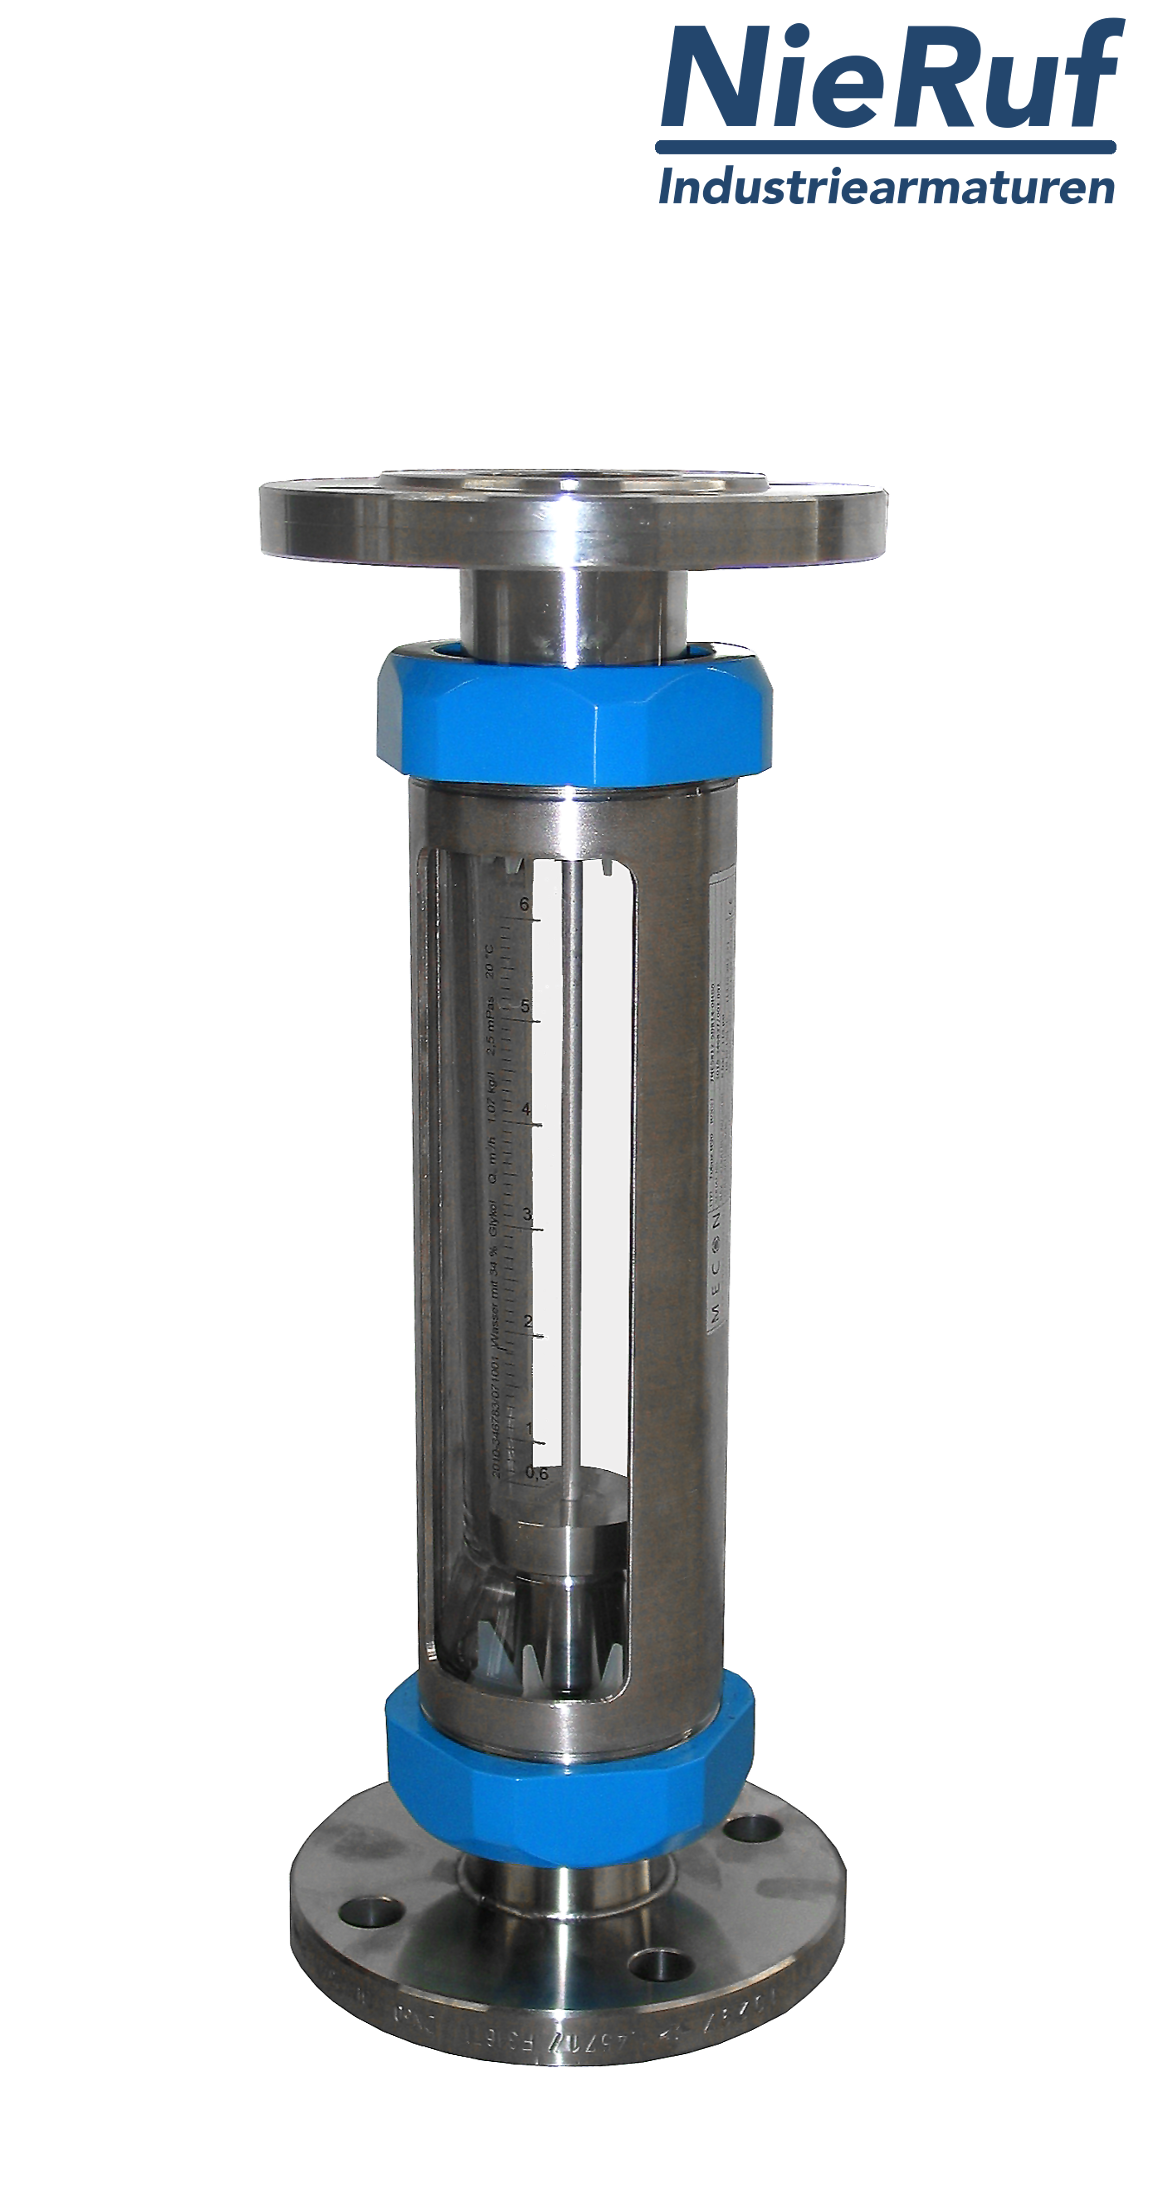 Variable area flowmeter stainless steel + borosilicate flange DN10 40.0 - 400.0 l/h water FKM